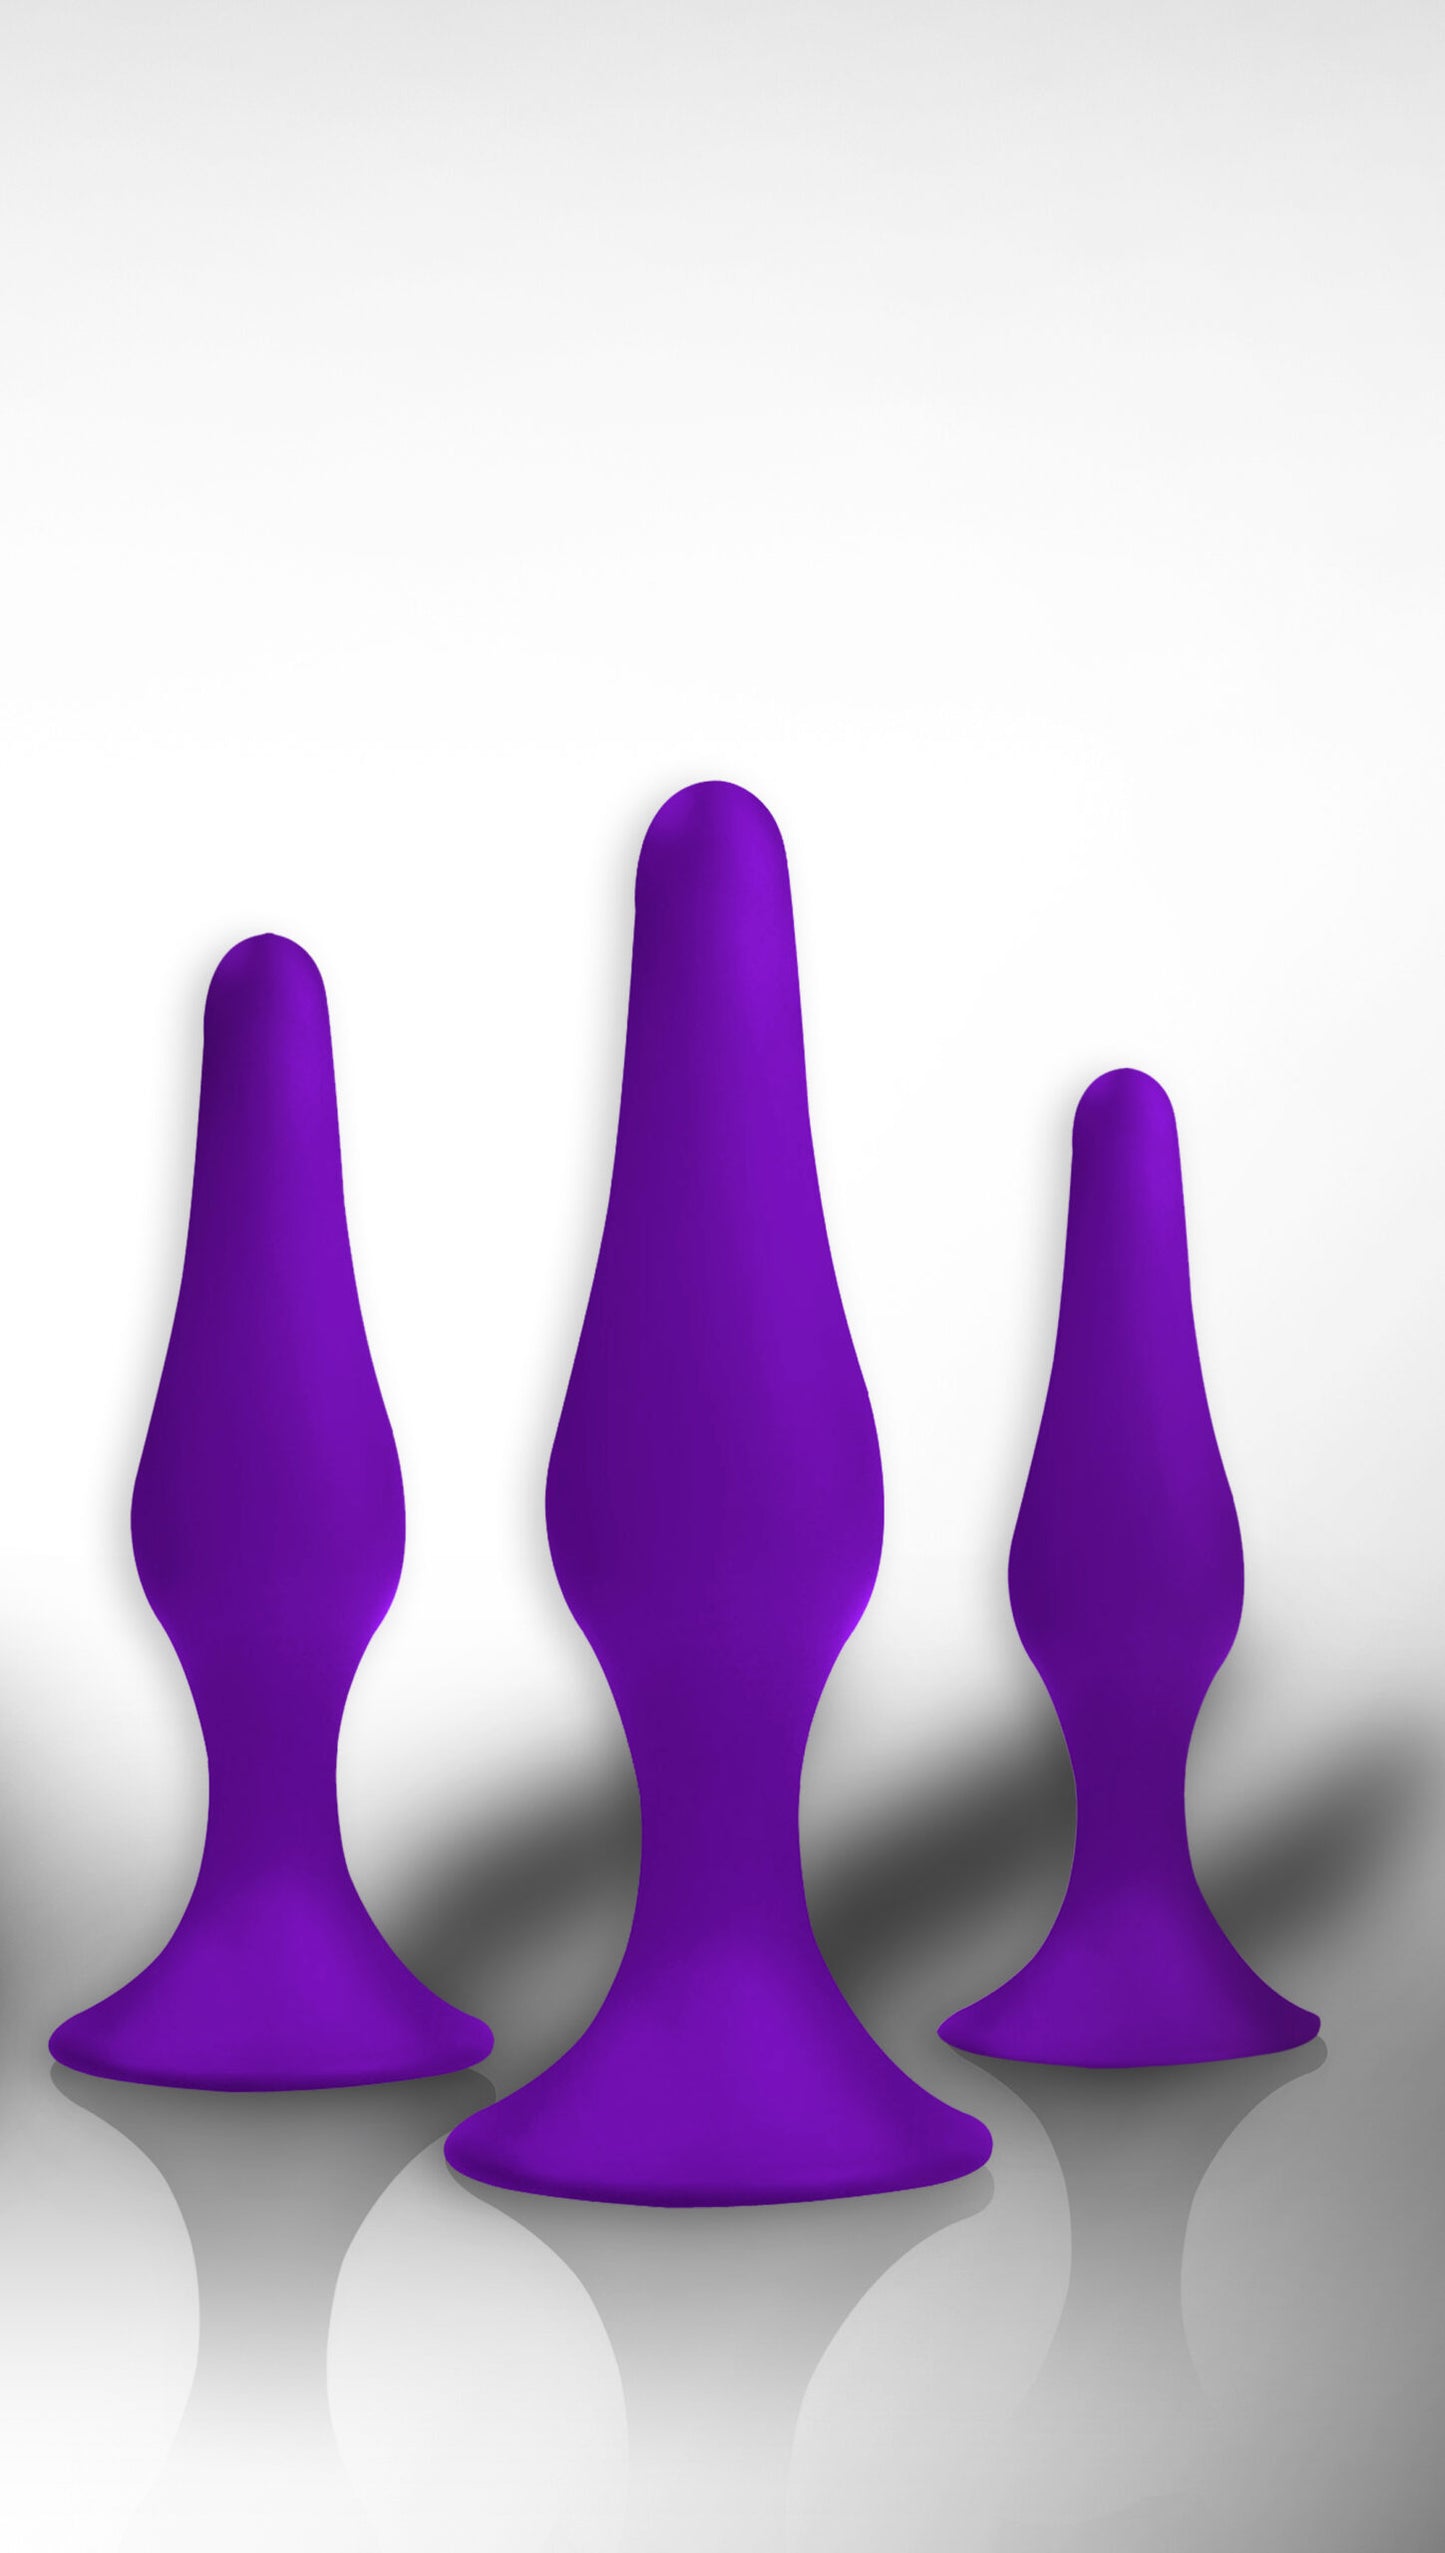 Power Escorts - BR12 Purple - Silicone Anal 3 Pack Plug Set - Strong Suction Cup